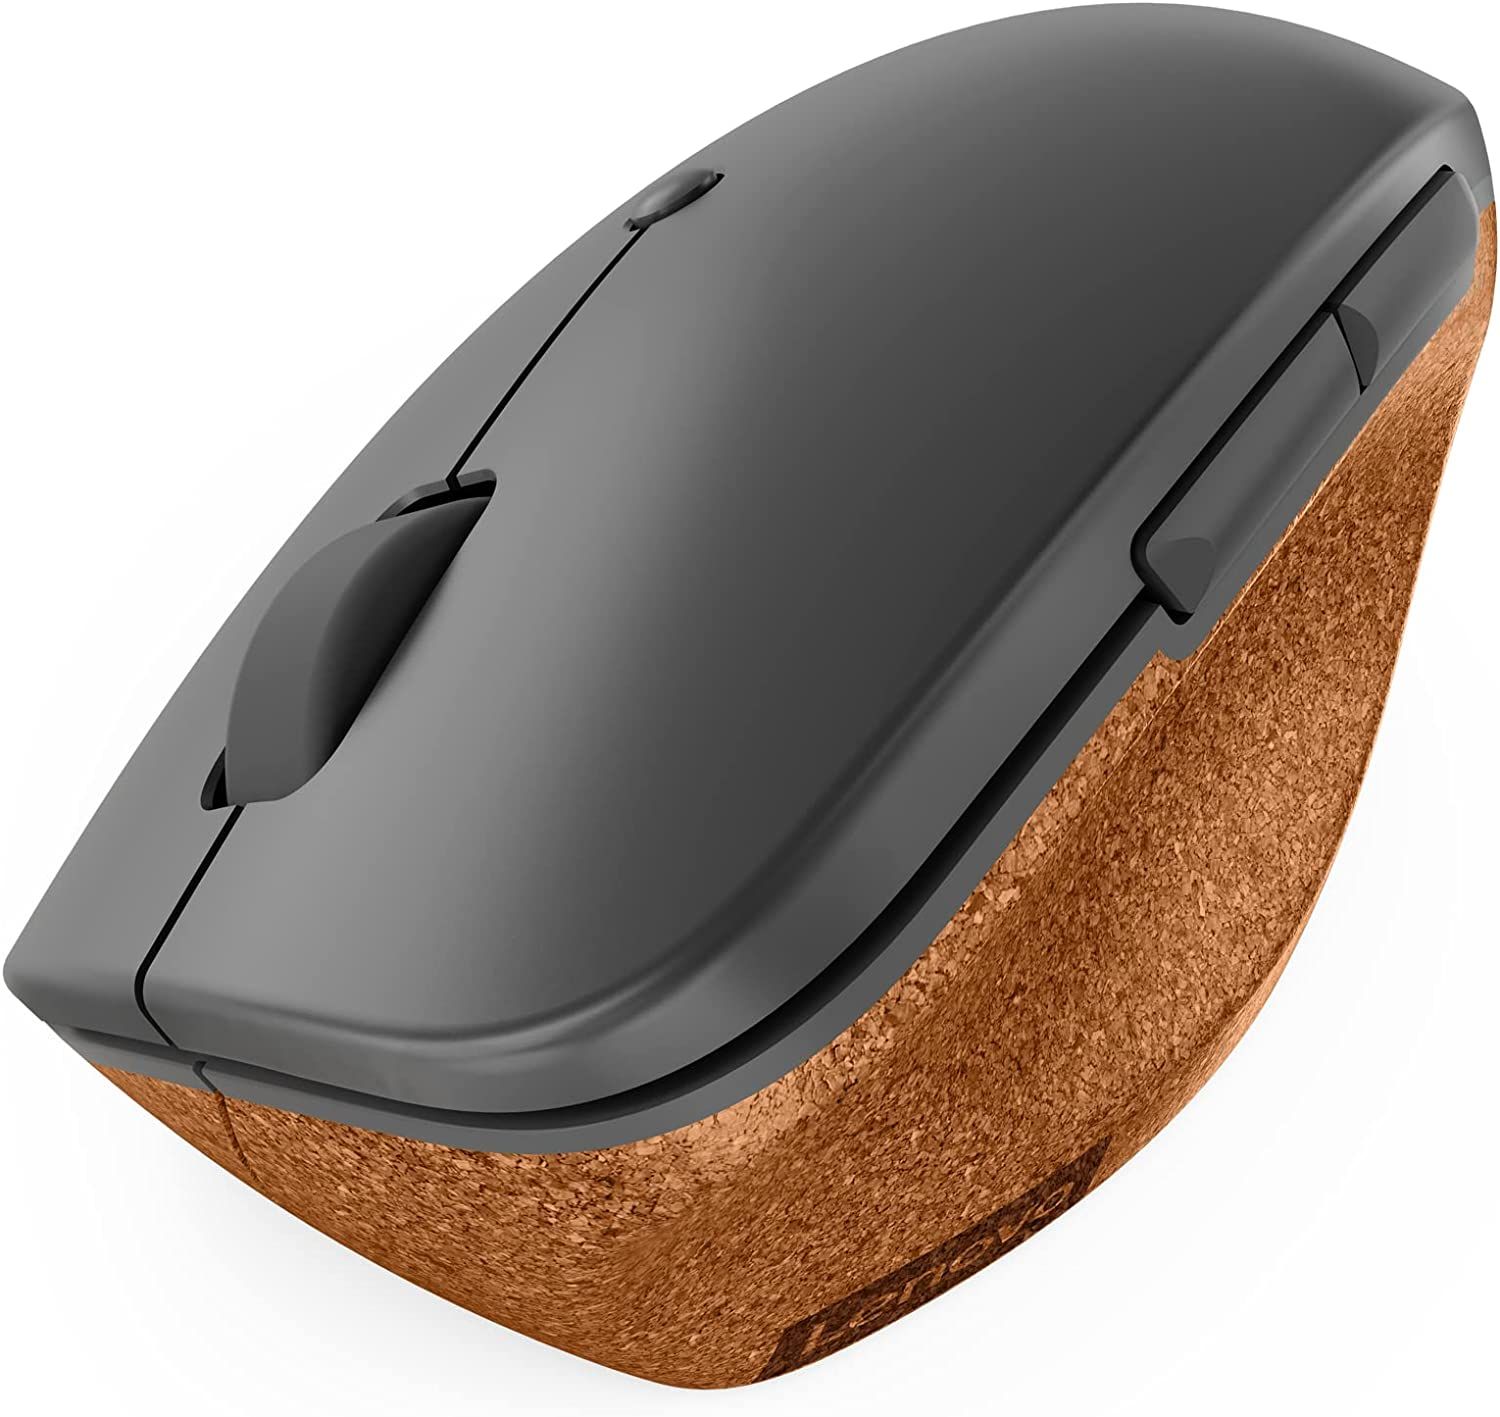 Is A Vertical Mouse Worth It?